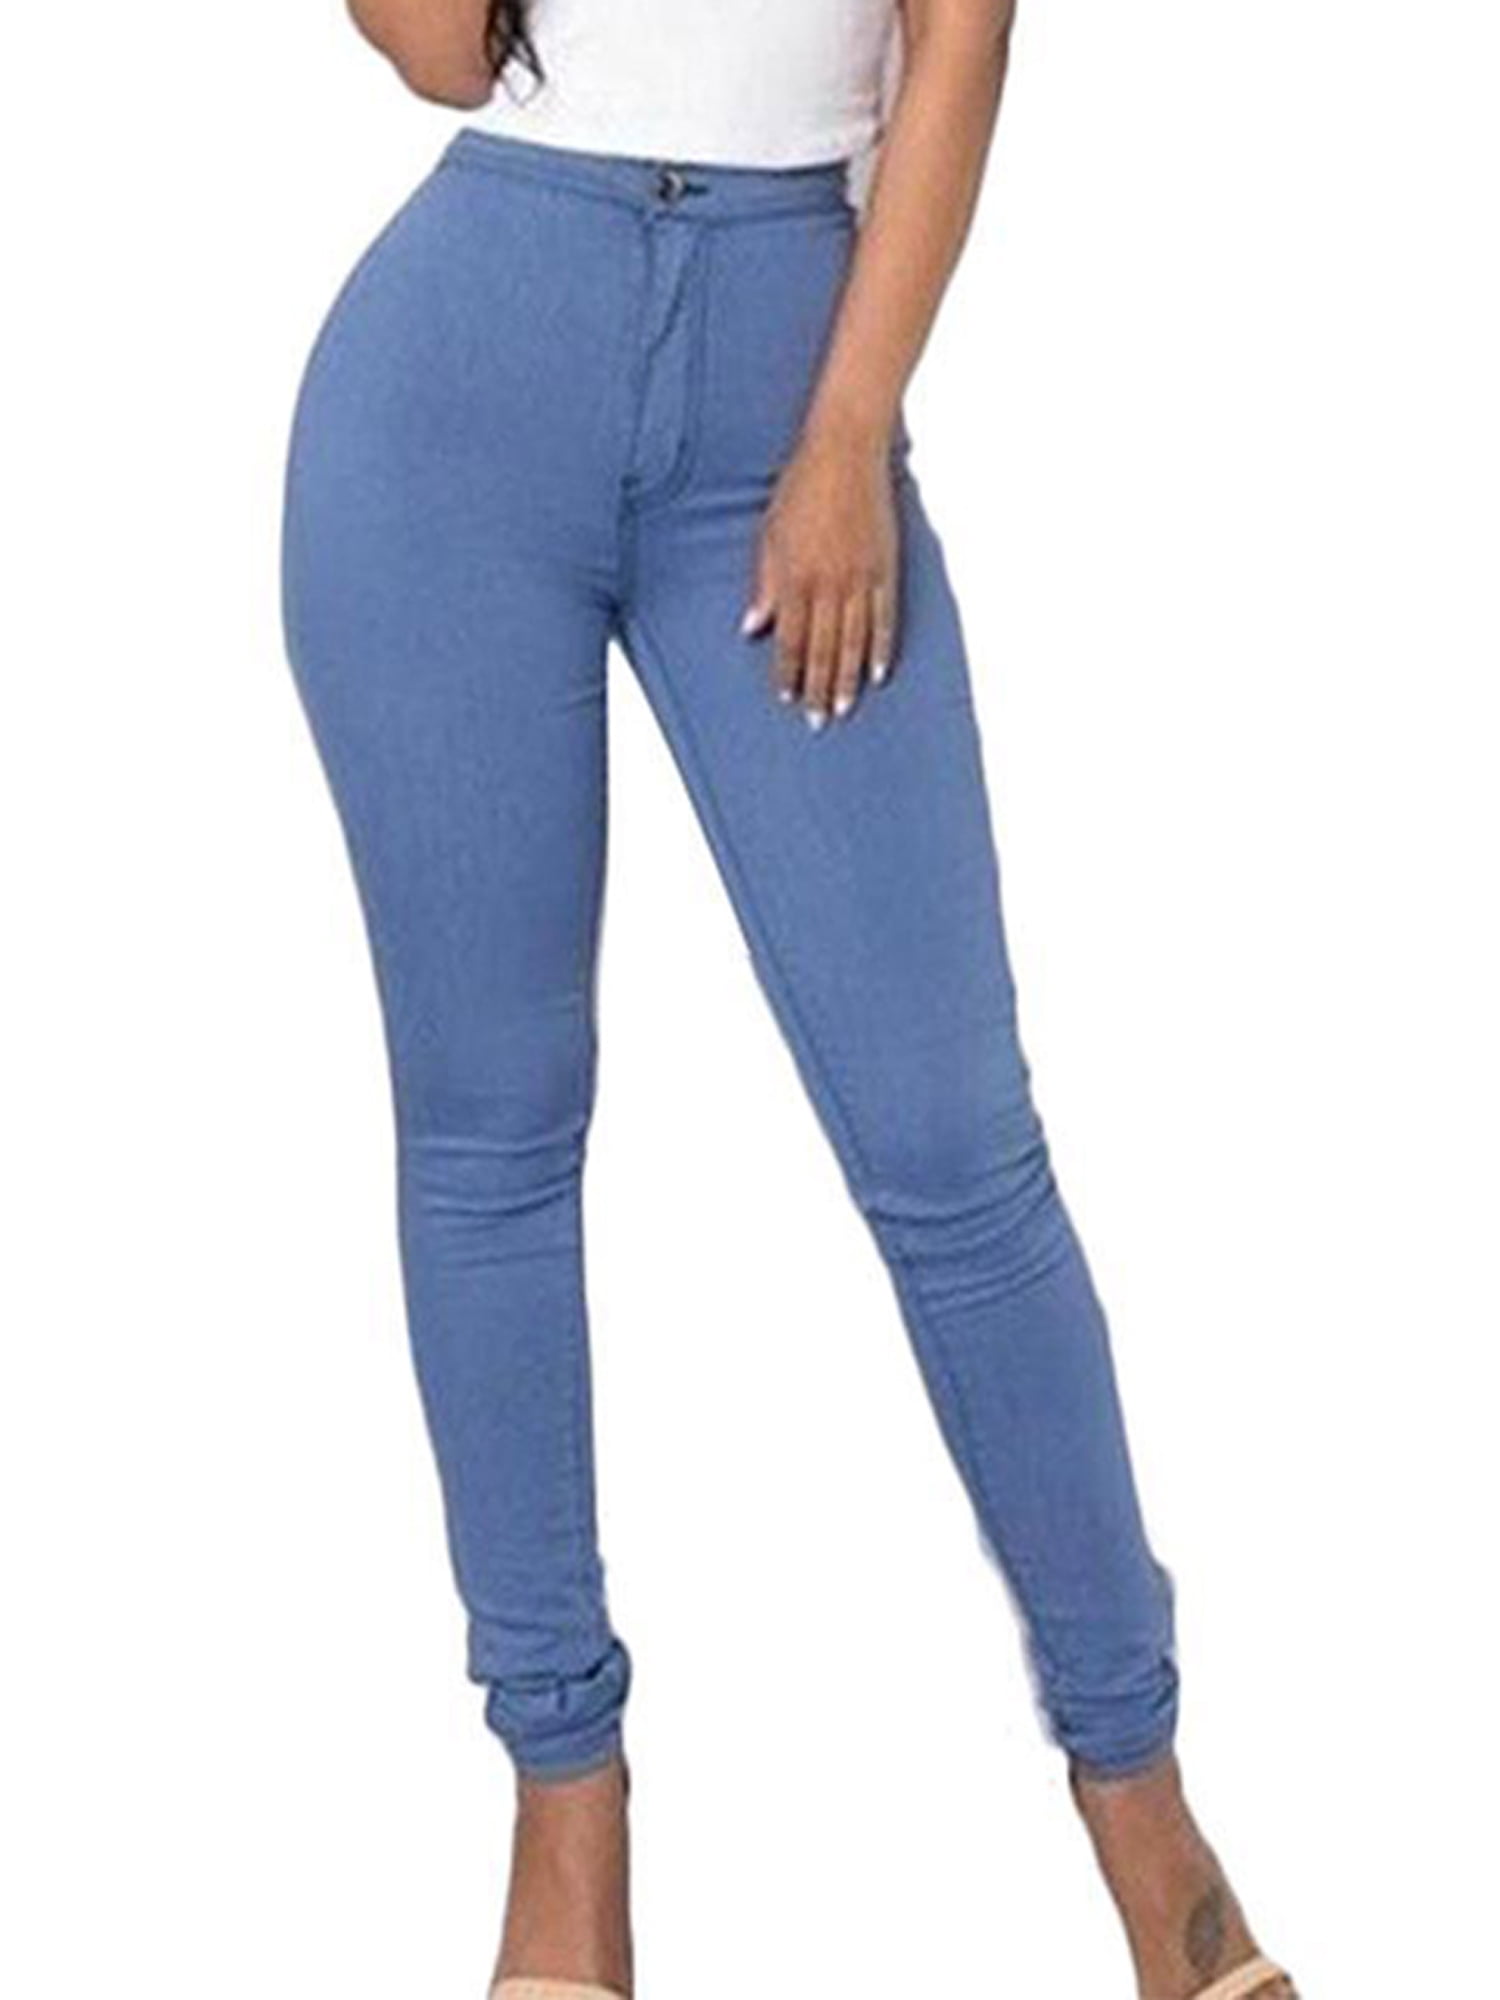 Women's High Waisted Slim Skinny Leggings Stretch Jegging Pencil Pants Trousers